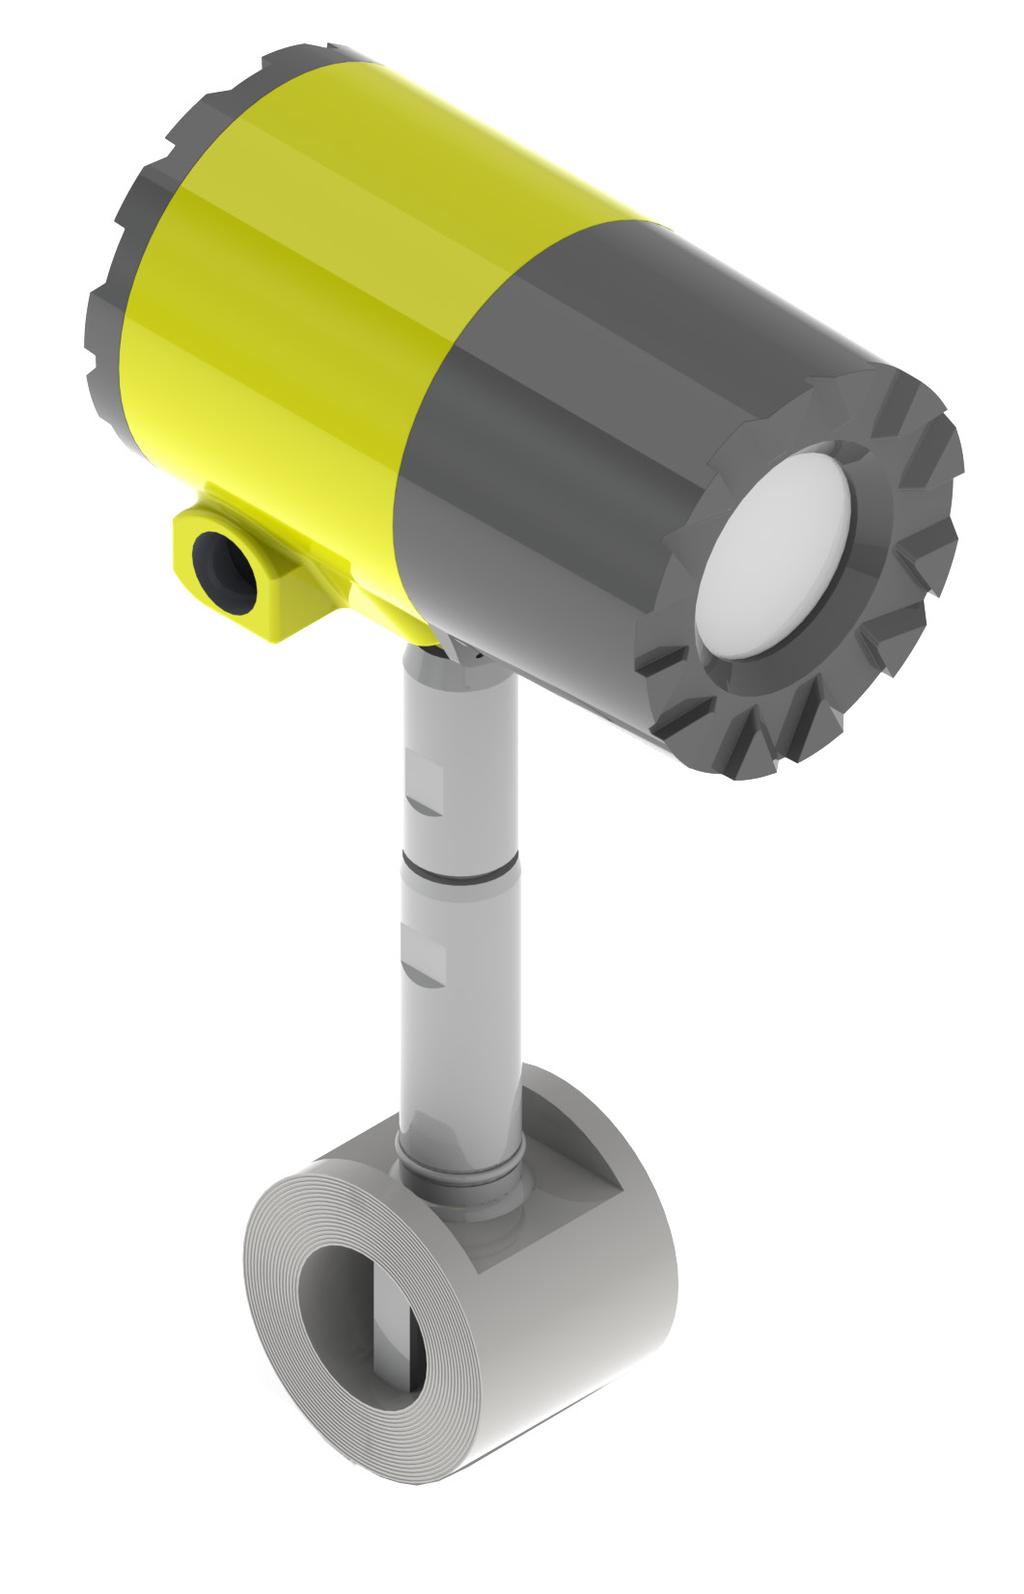 In-Line Vortex Flow Meter Armstrong International is pleased to offer vortex technology for measurement of steam, liquid, and gas flows.